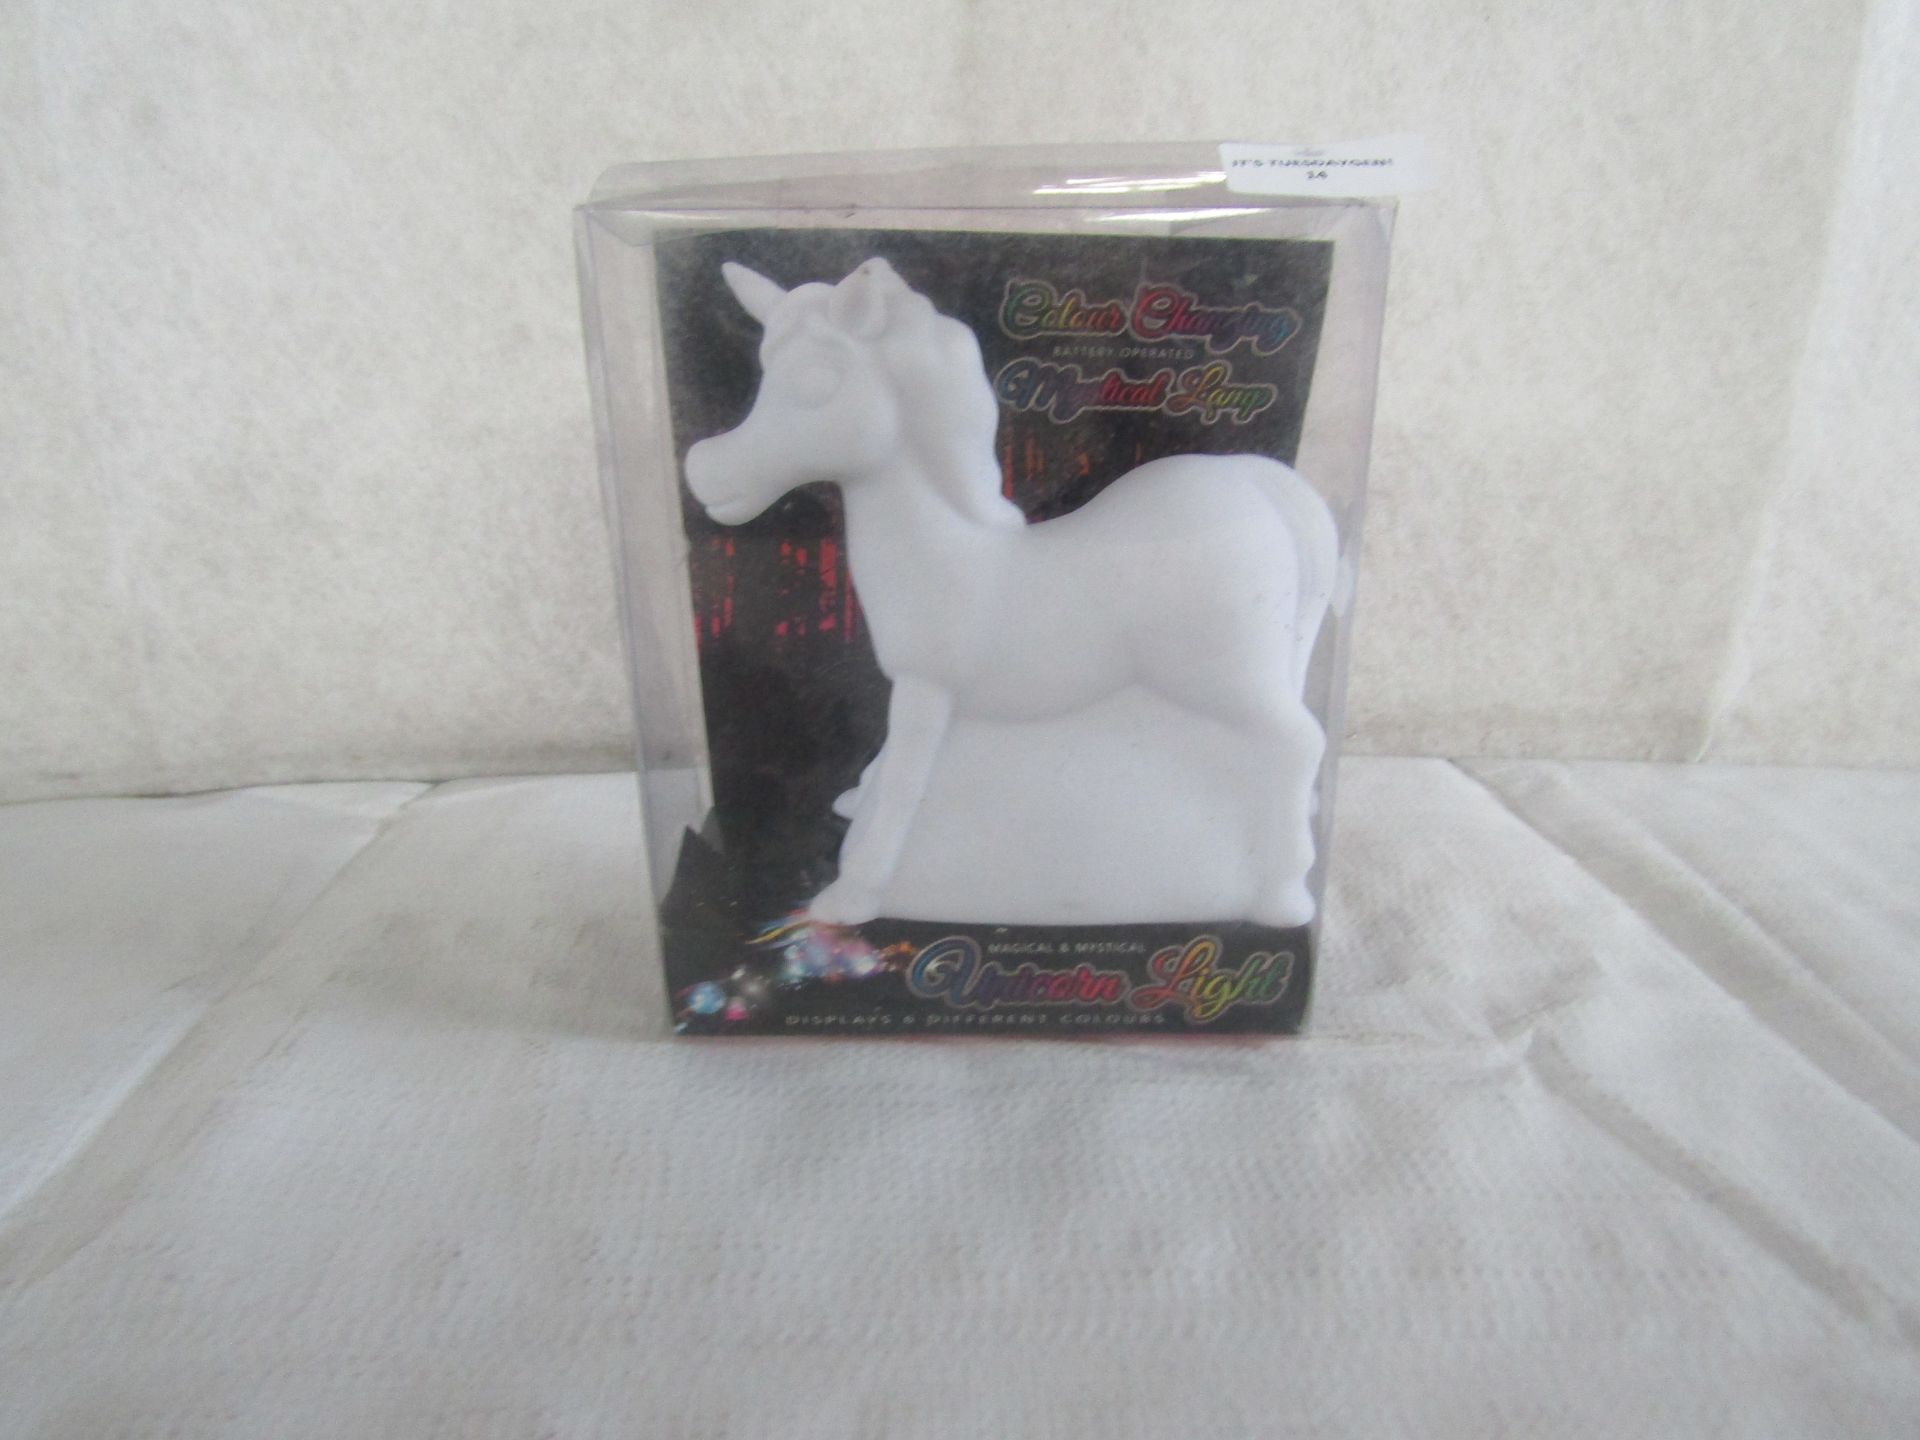 Colour-Changing Mystical Unicorn Lamp - Packaged.